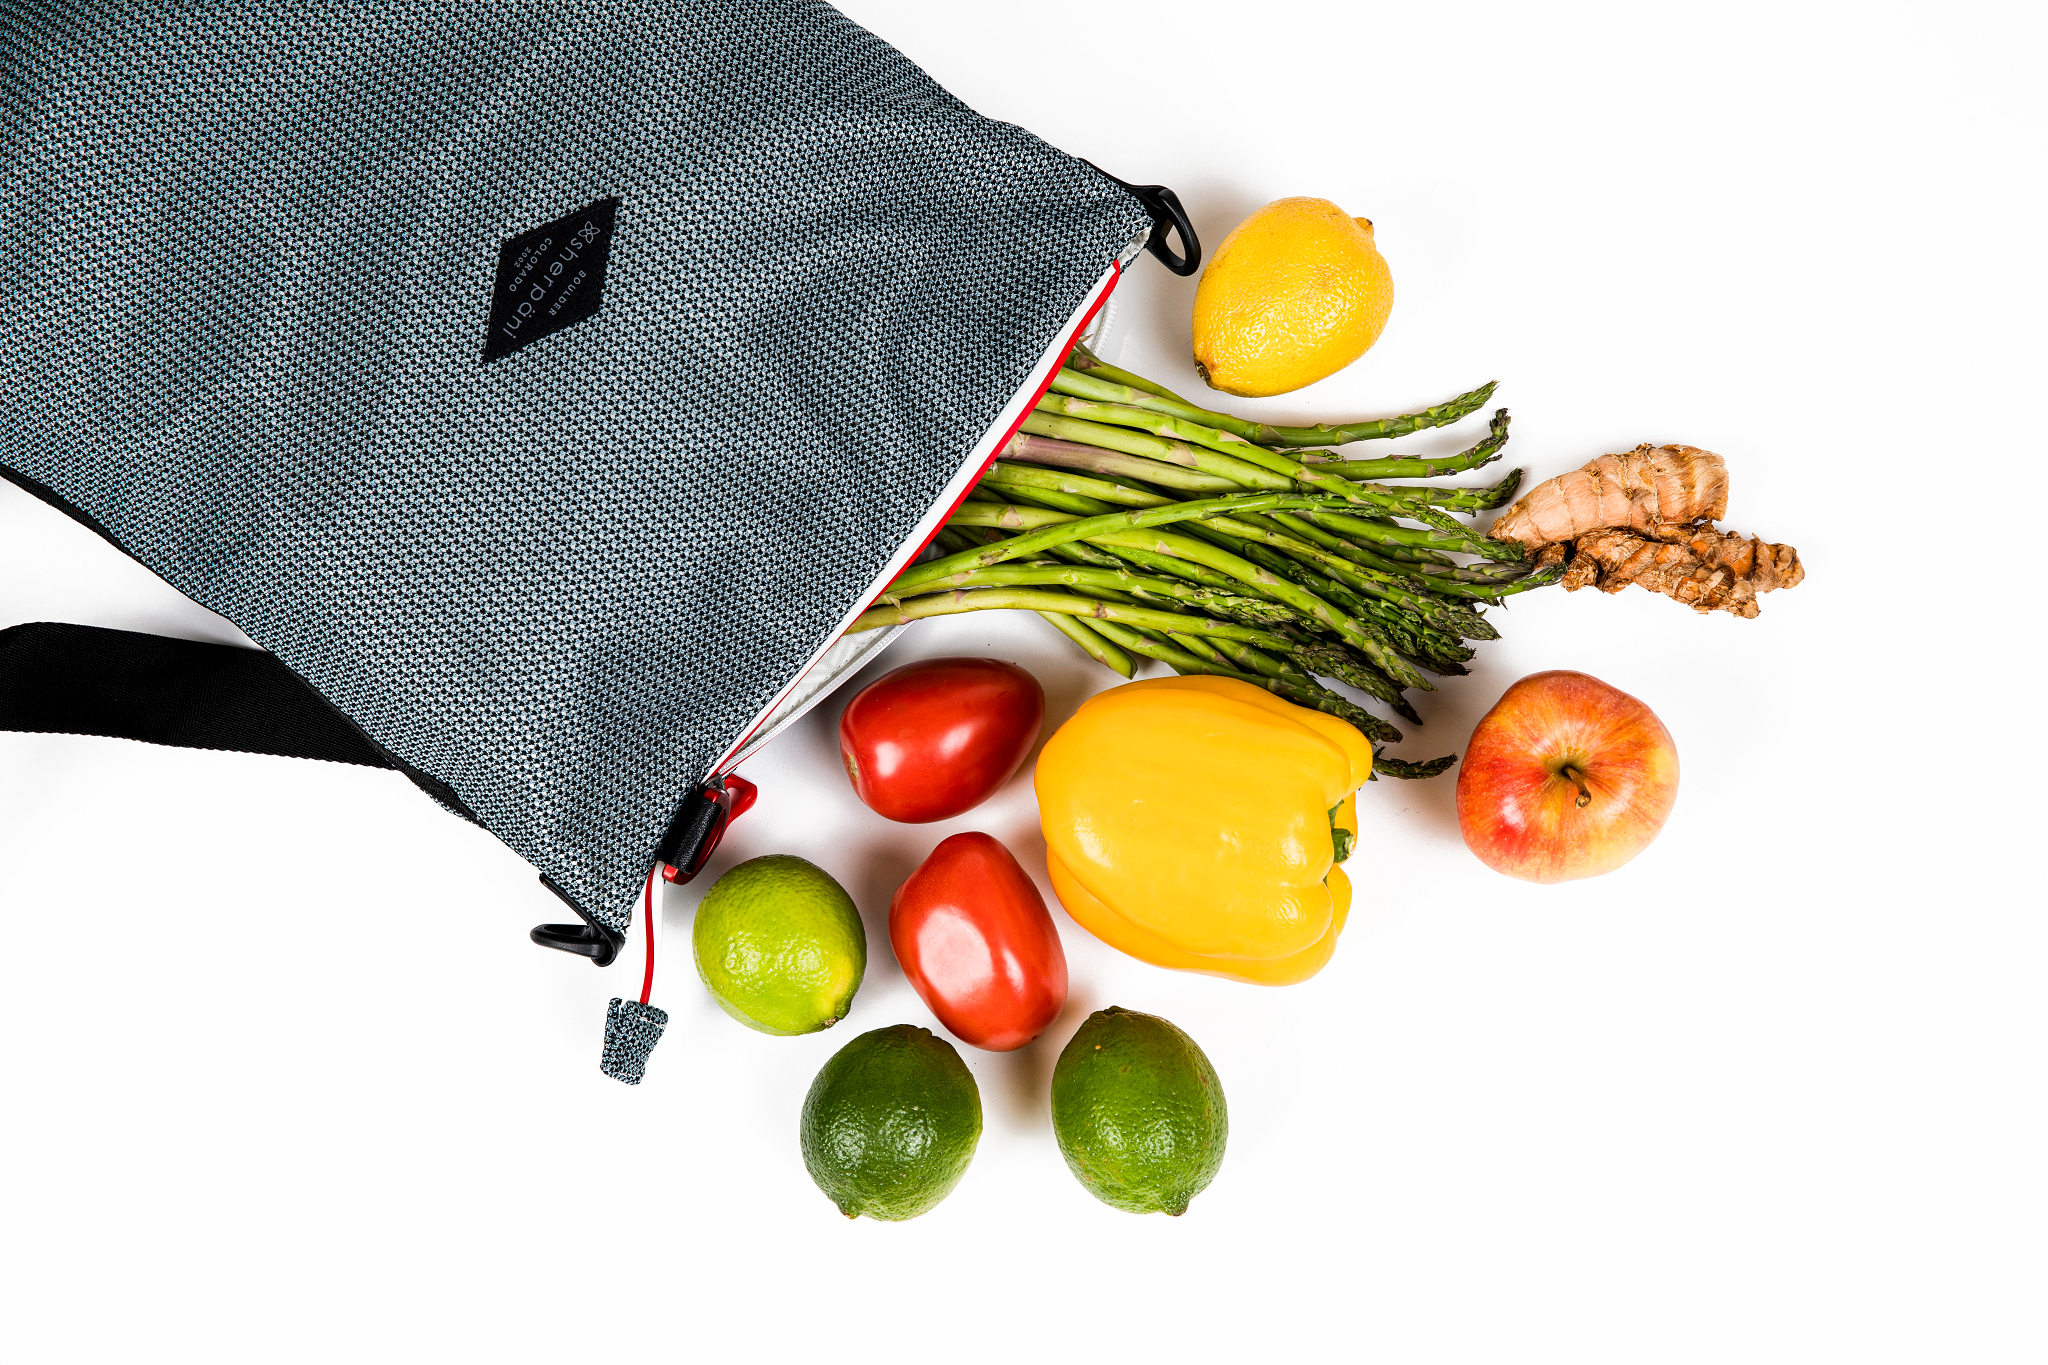 Mesh bag with produce